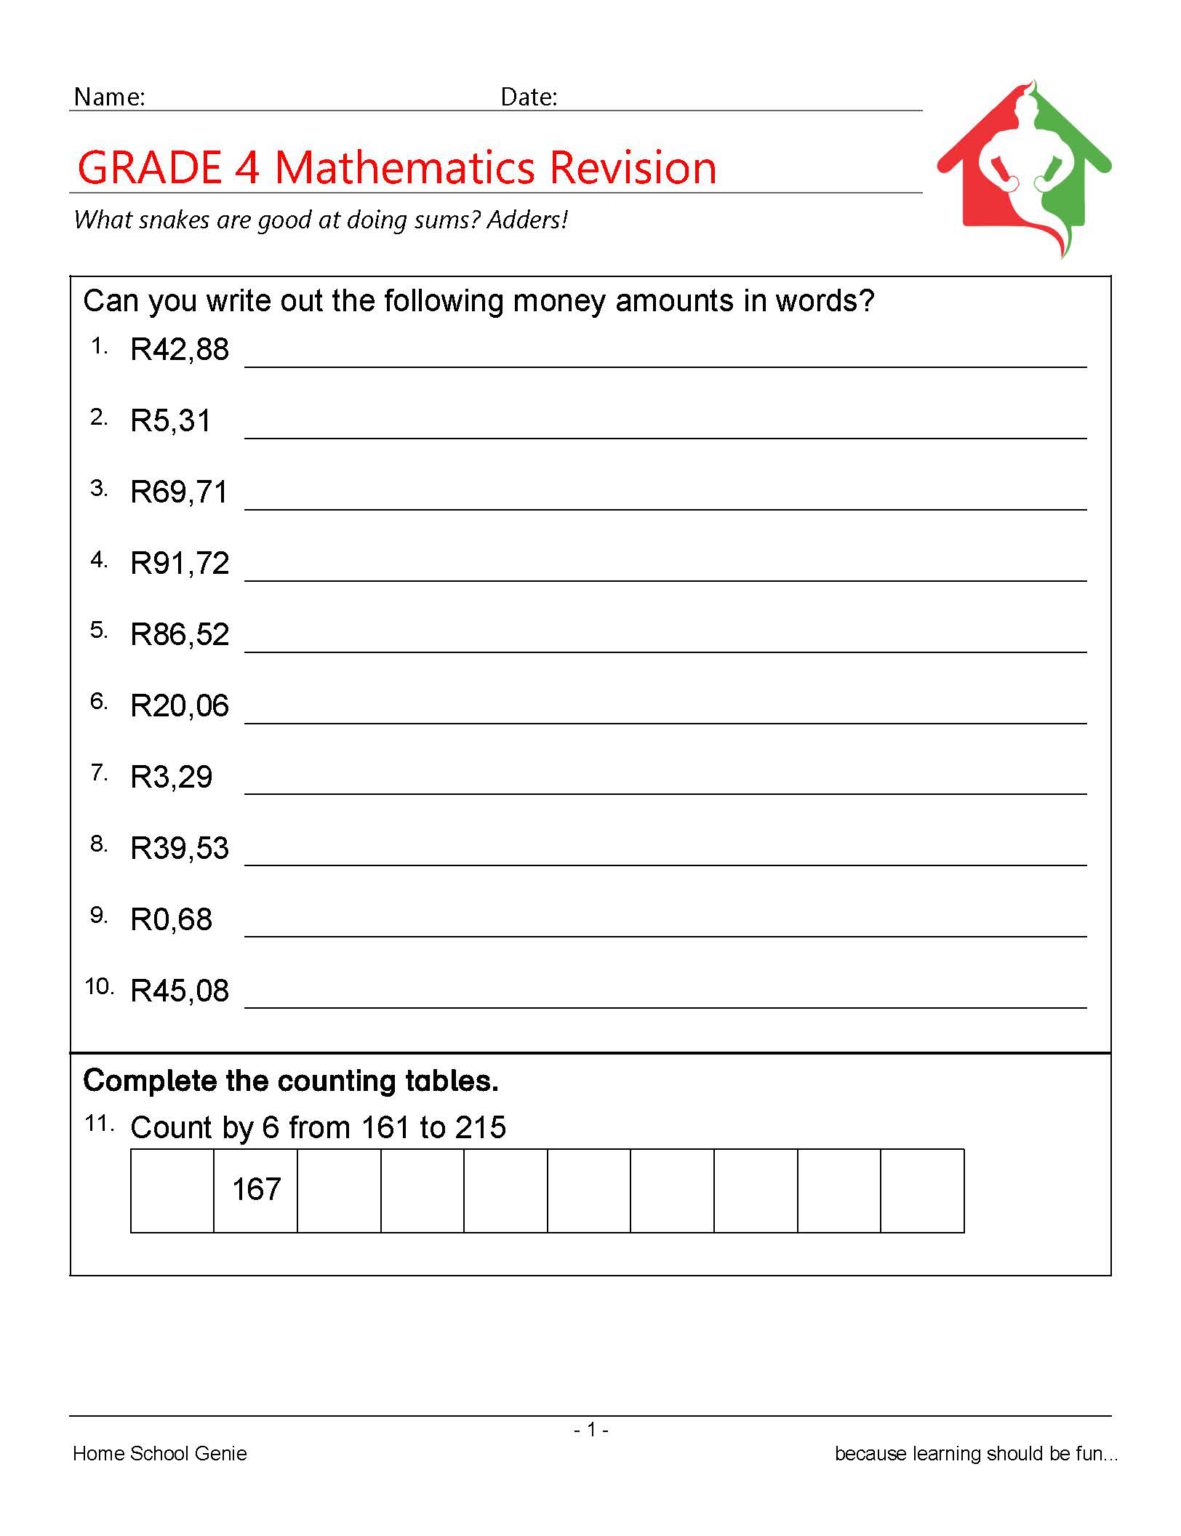 grade 4 math revision full year 16pages worksheets